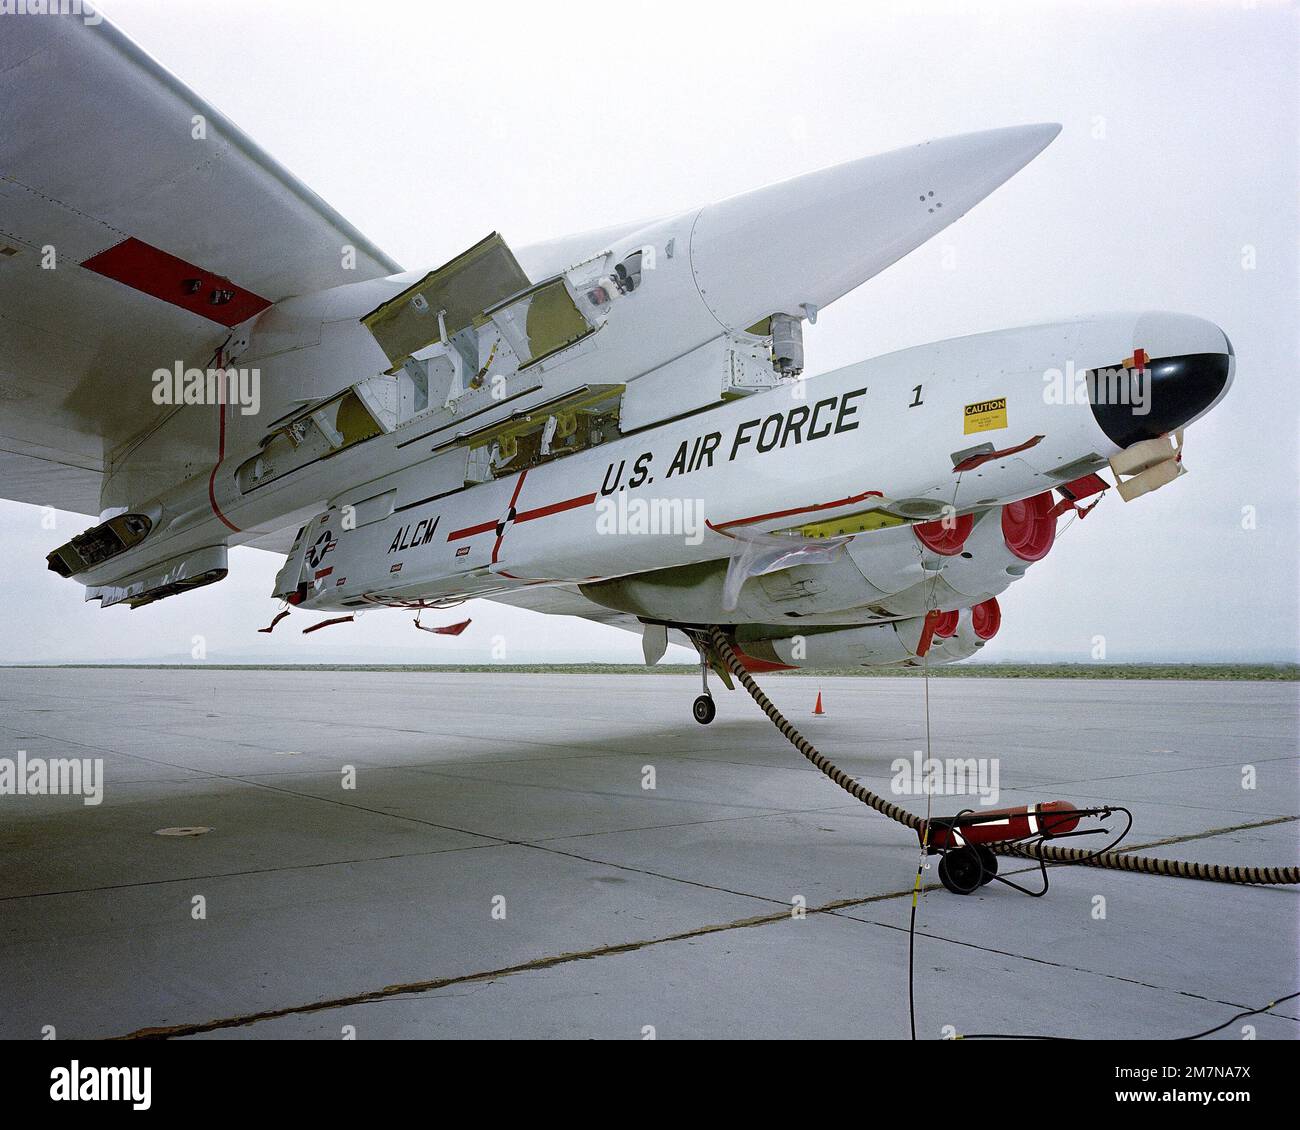 A close-up view of an AGM-86 air-launched cruise missile loaded on a B-52 Stratofortress aircraft wing pylon. Country: Unknown Stock Photo